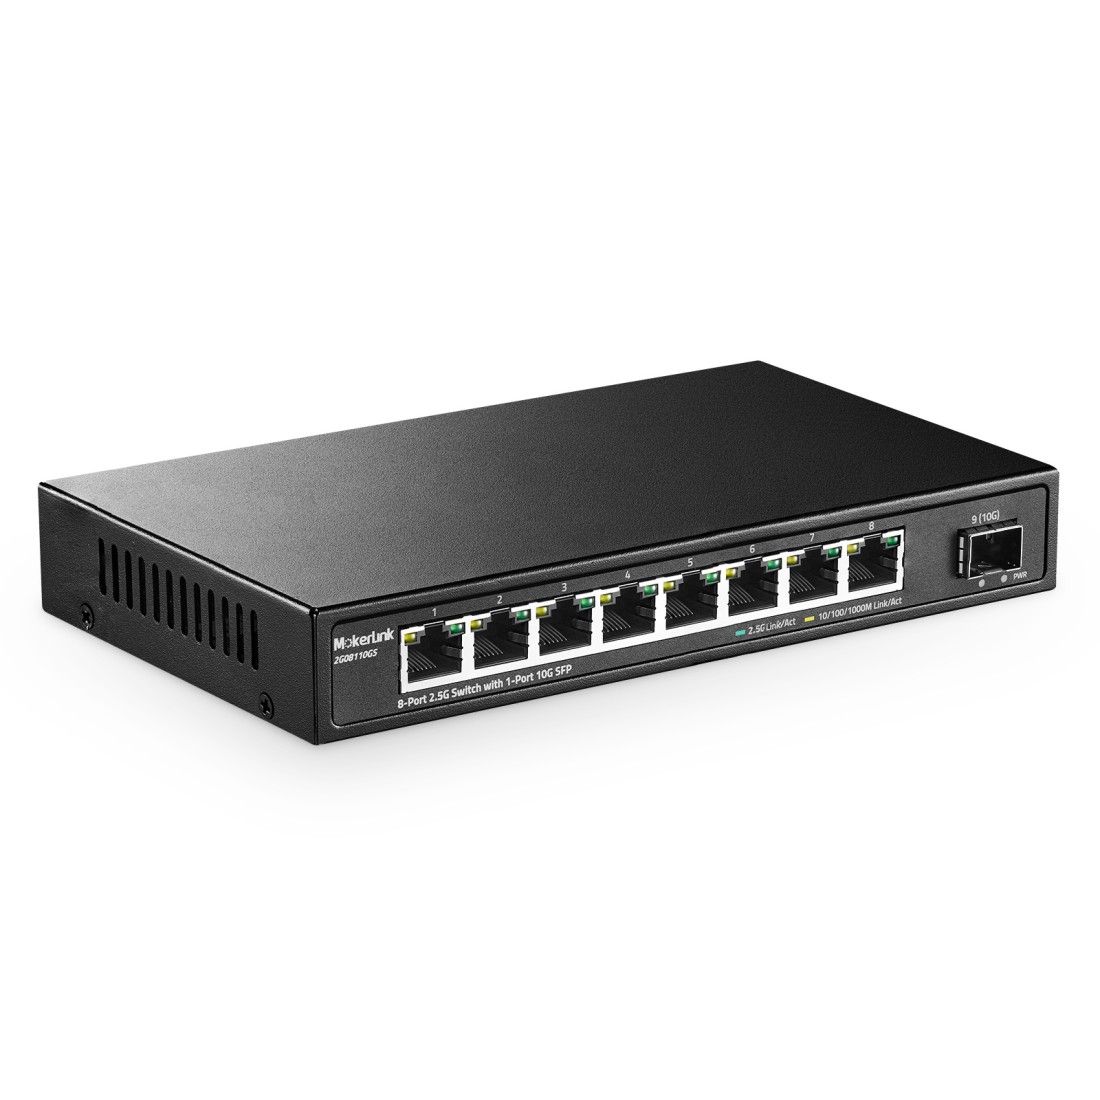 Get reliable 10G Ethernet Switches from US stock with fast shipping